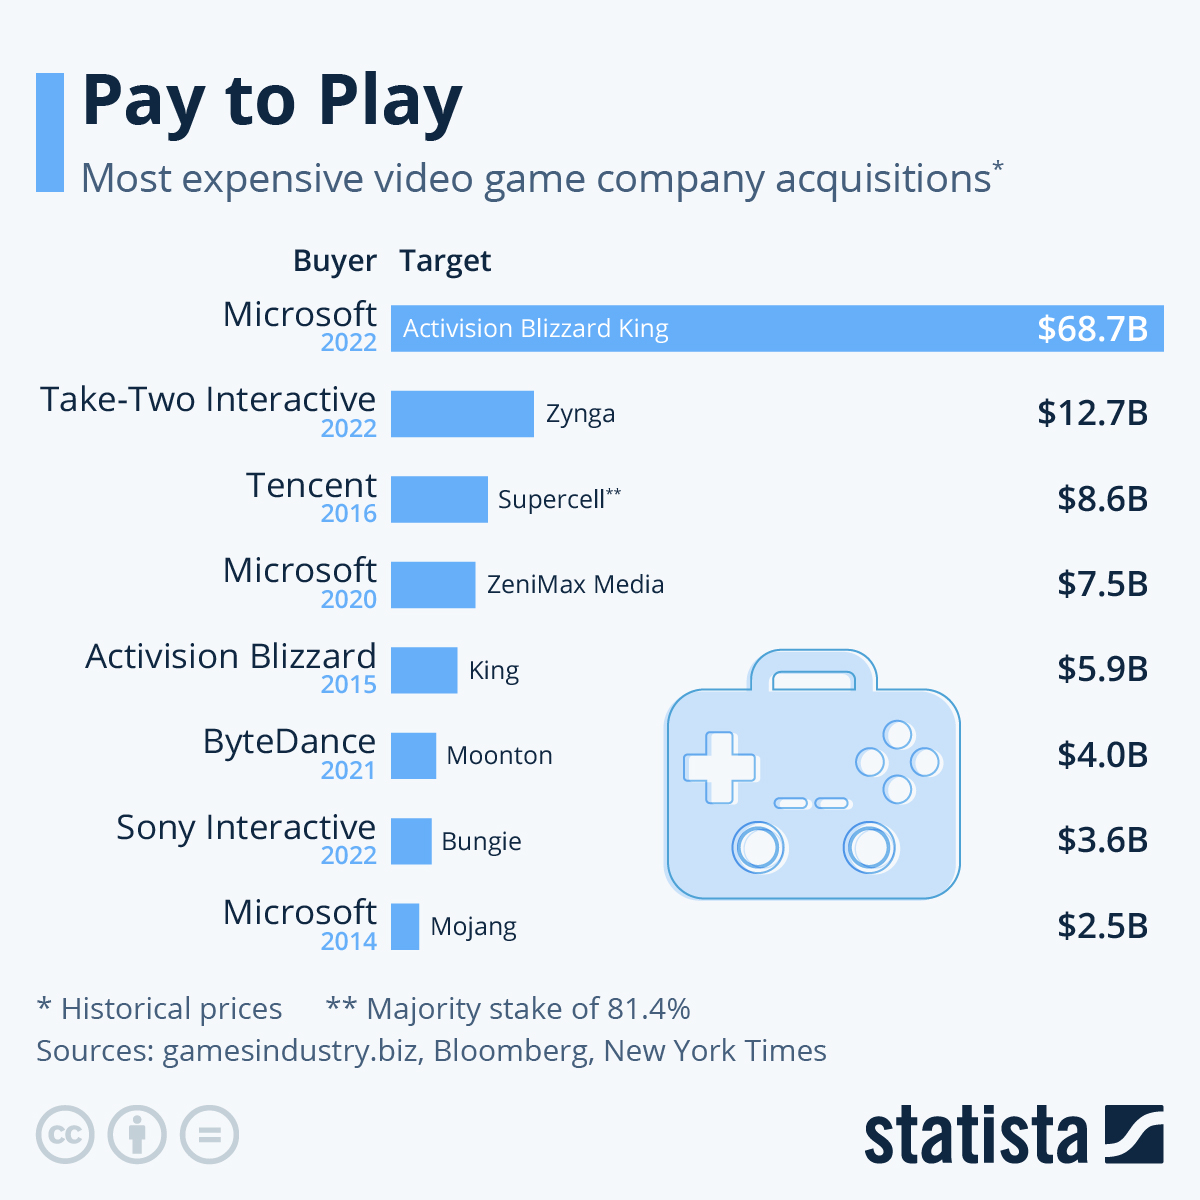 Most Expensive Video Game Company Acquisitions